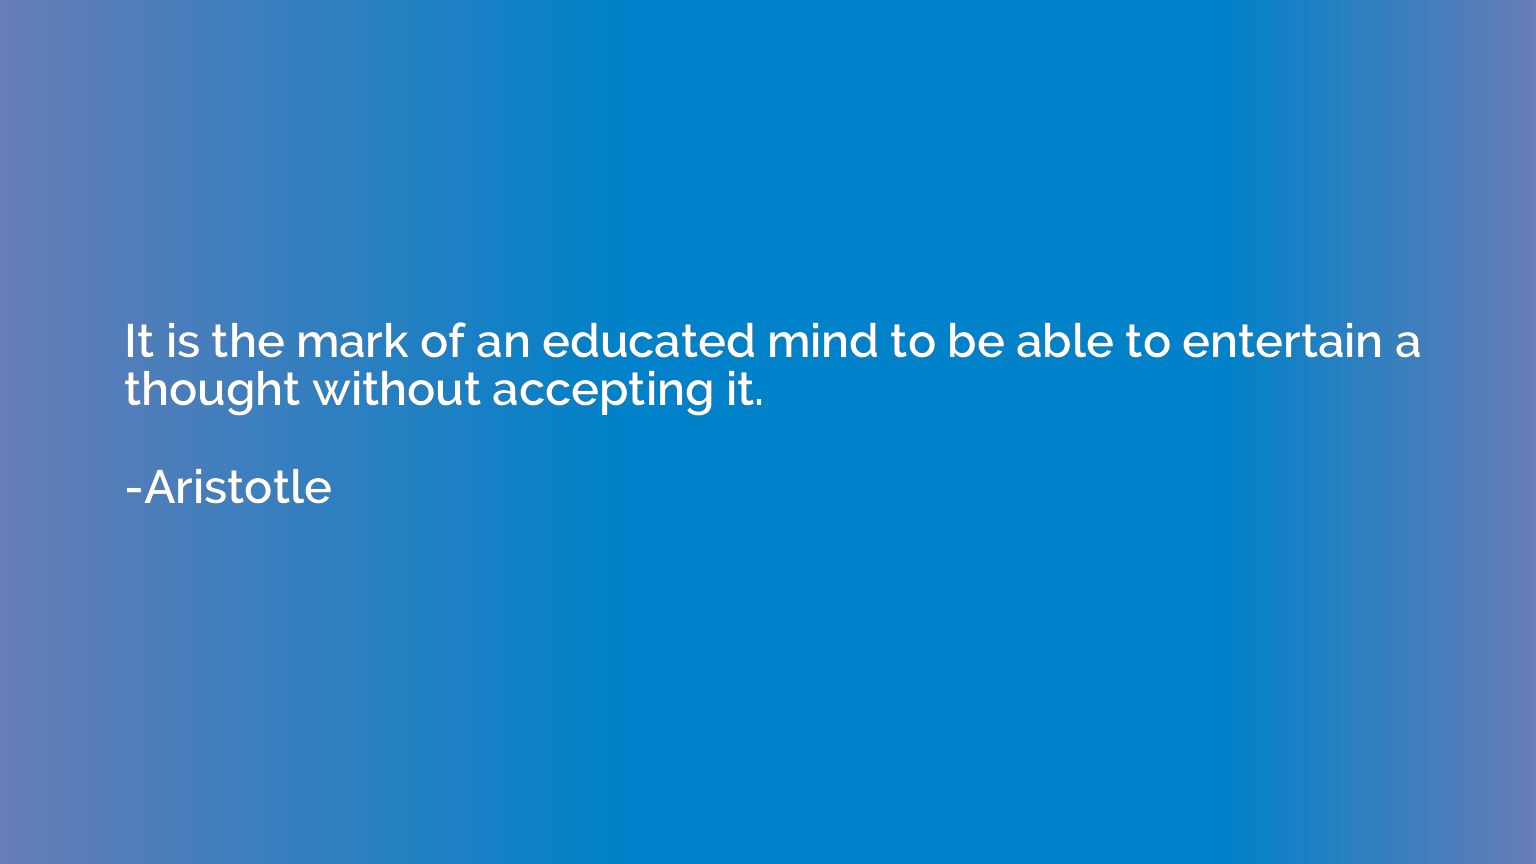 It is the mark of an educated mind to be able to entertain a